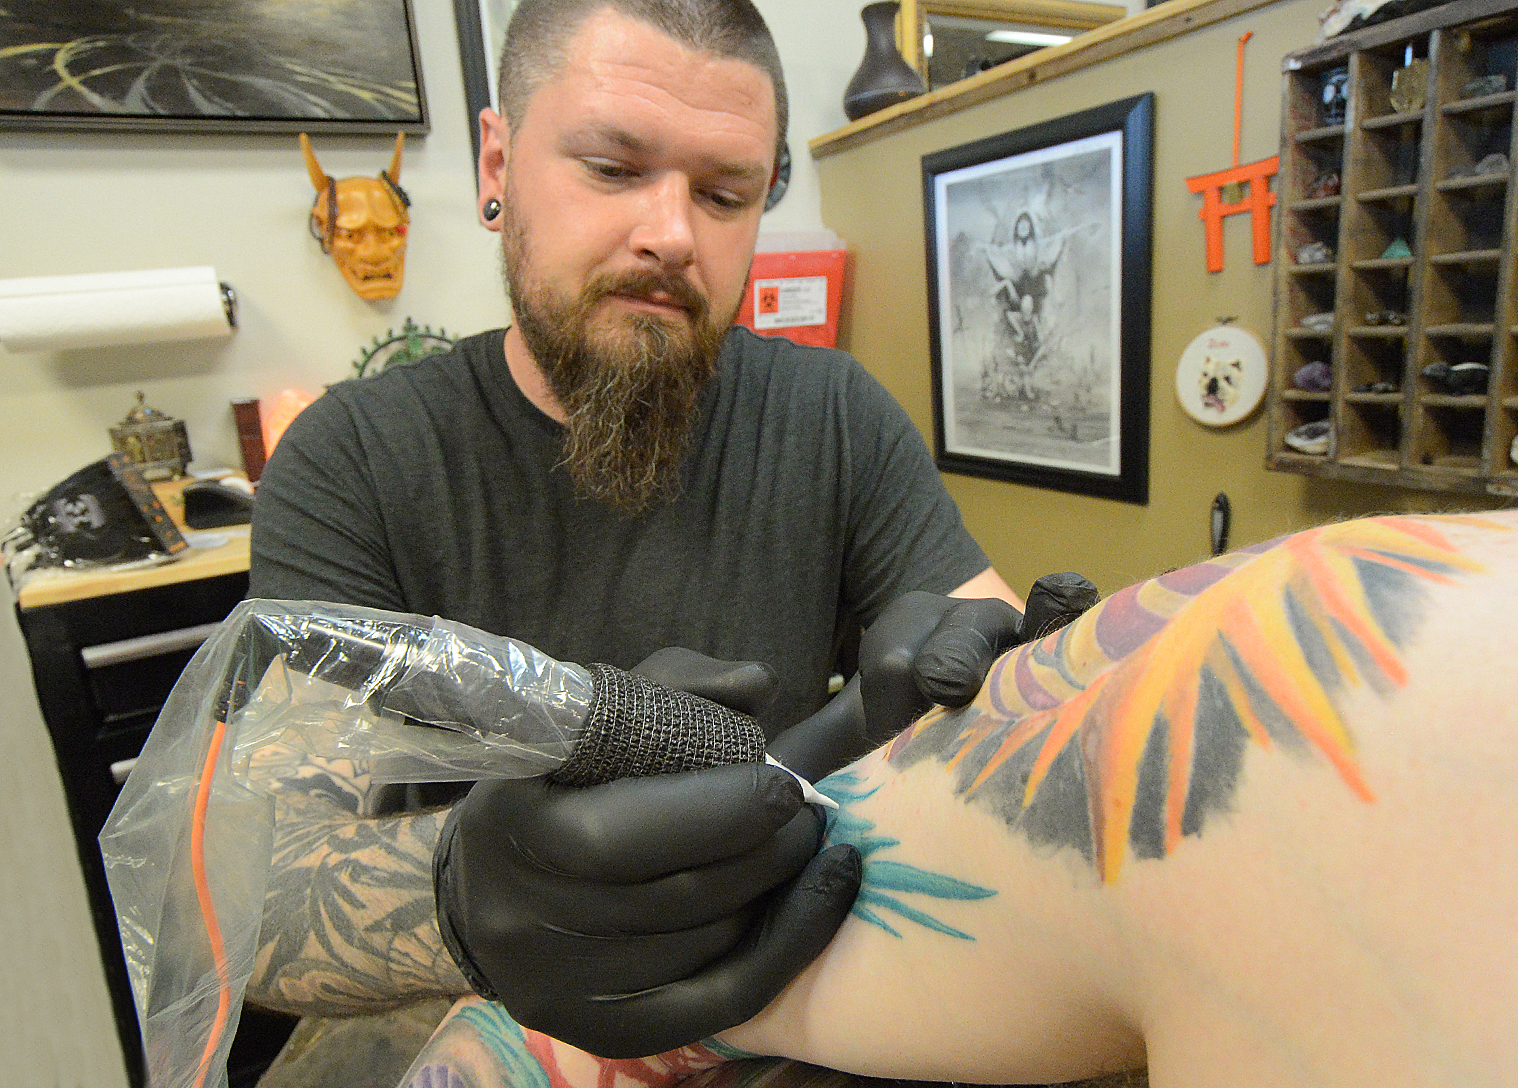 Parasol Tattoo In Congress Plaza Aims To Make Its Shop Less Intimidating  For Its Customers - Saratoga Business Journal